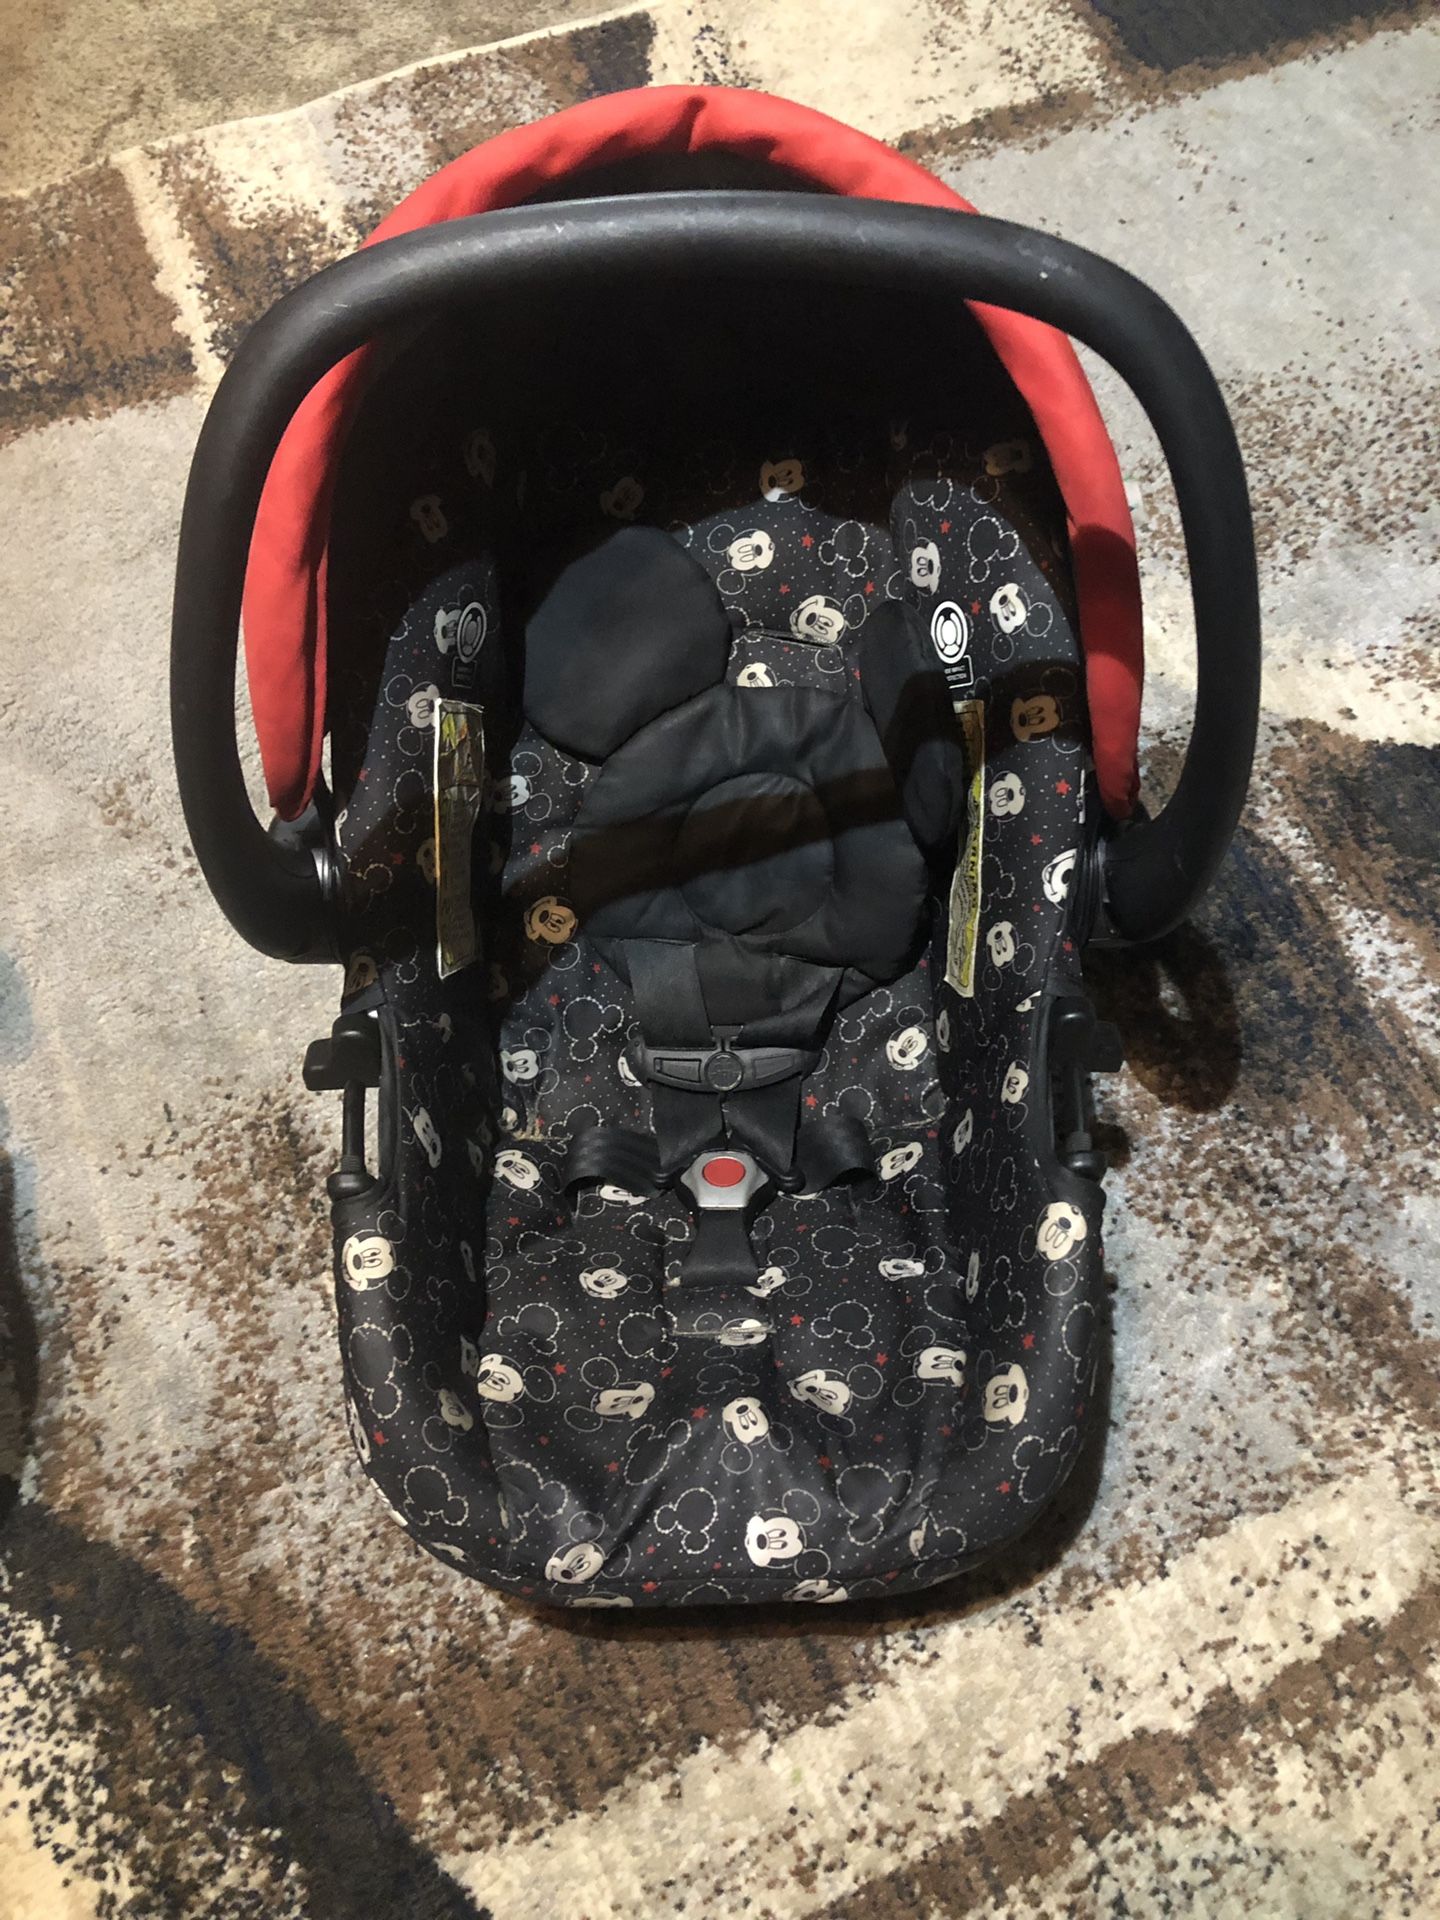 Mickey Mouse car seat